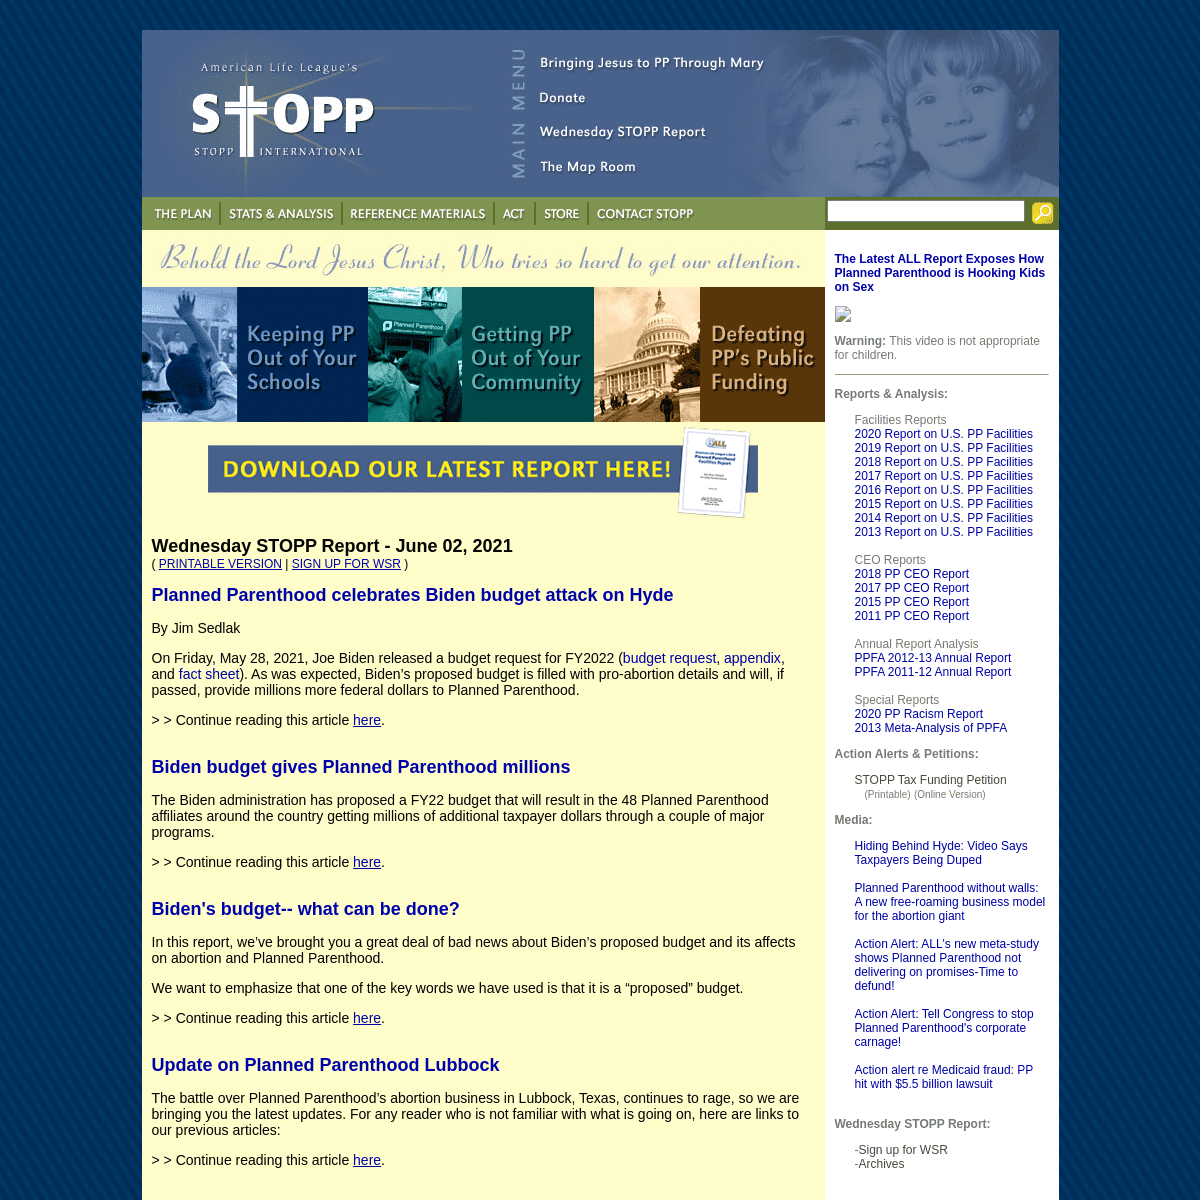 A complete backup of https://stopp.org